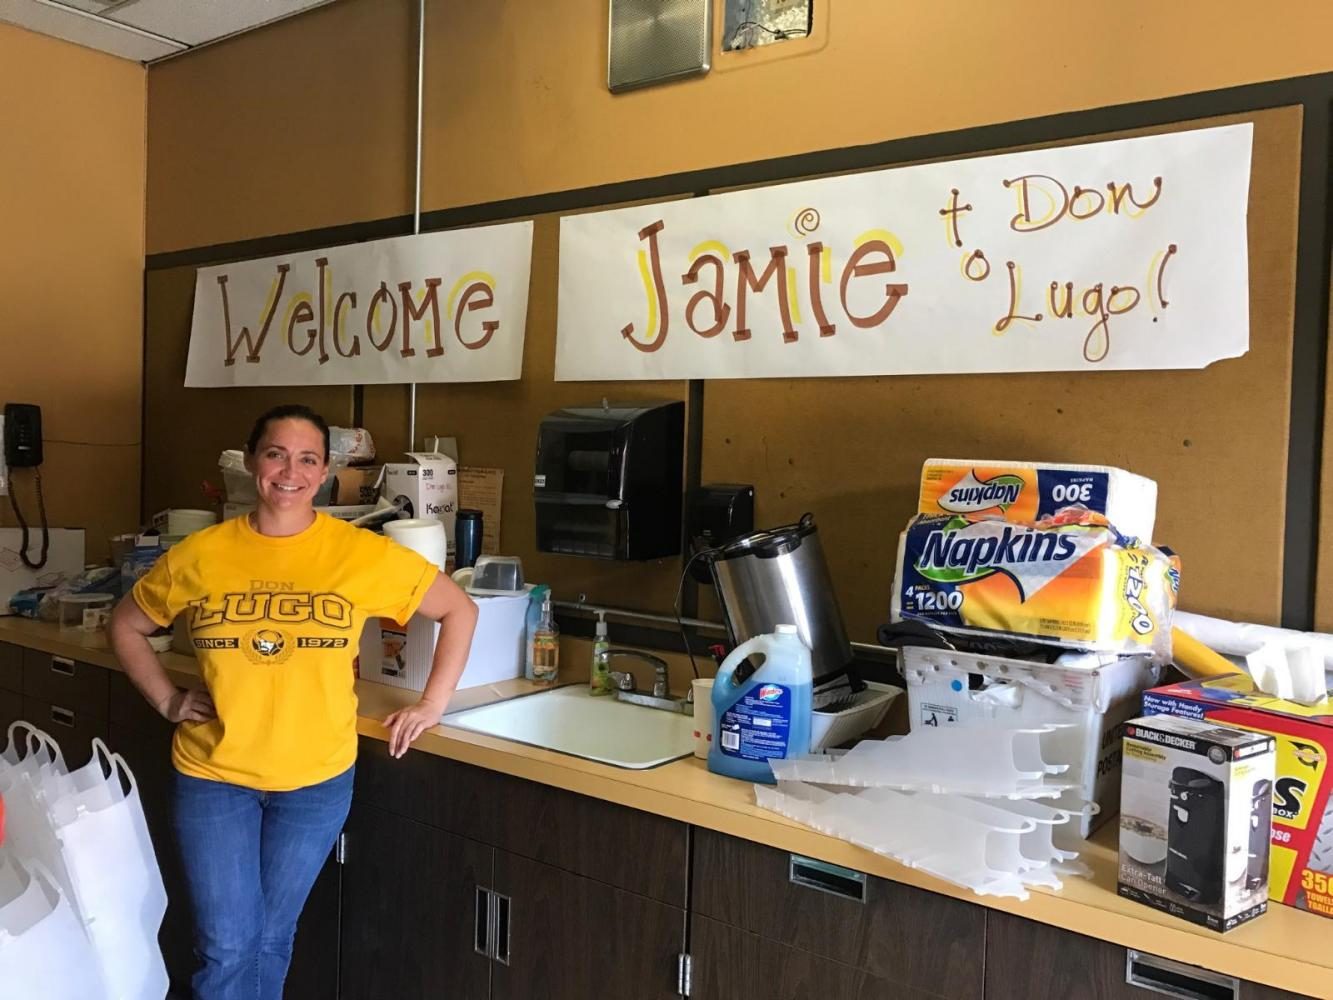 The Leadership department welcomes Jaime with a sign hung inside the student store. Jaime states ,I was excited to come over here. I have seen the student store and was wanting to come and help. 